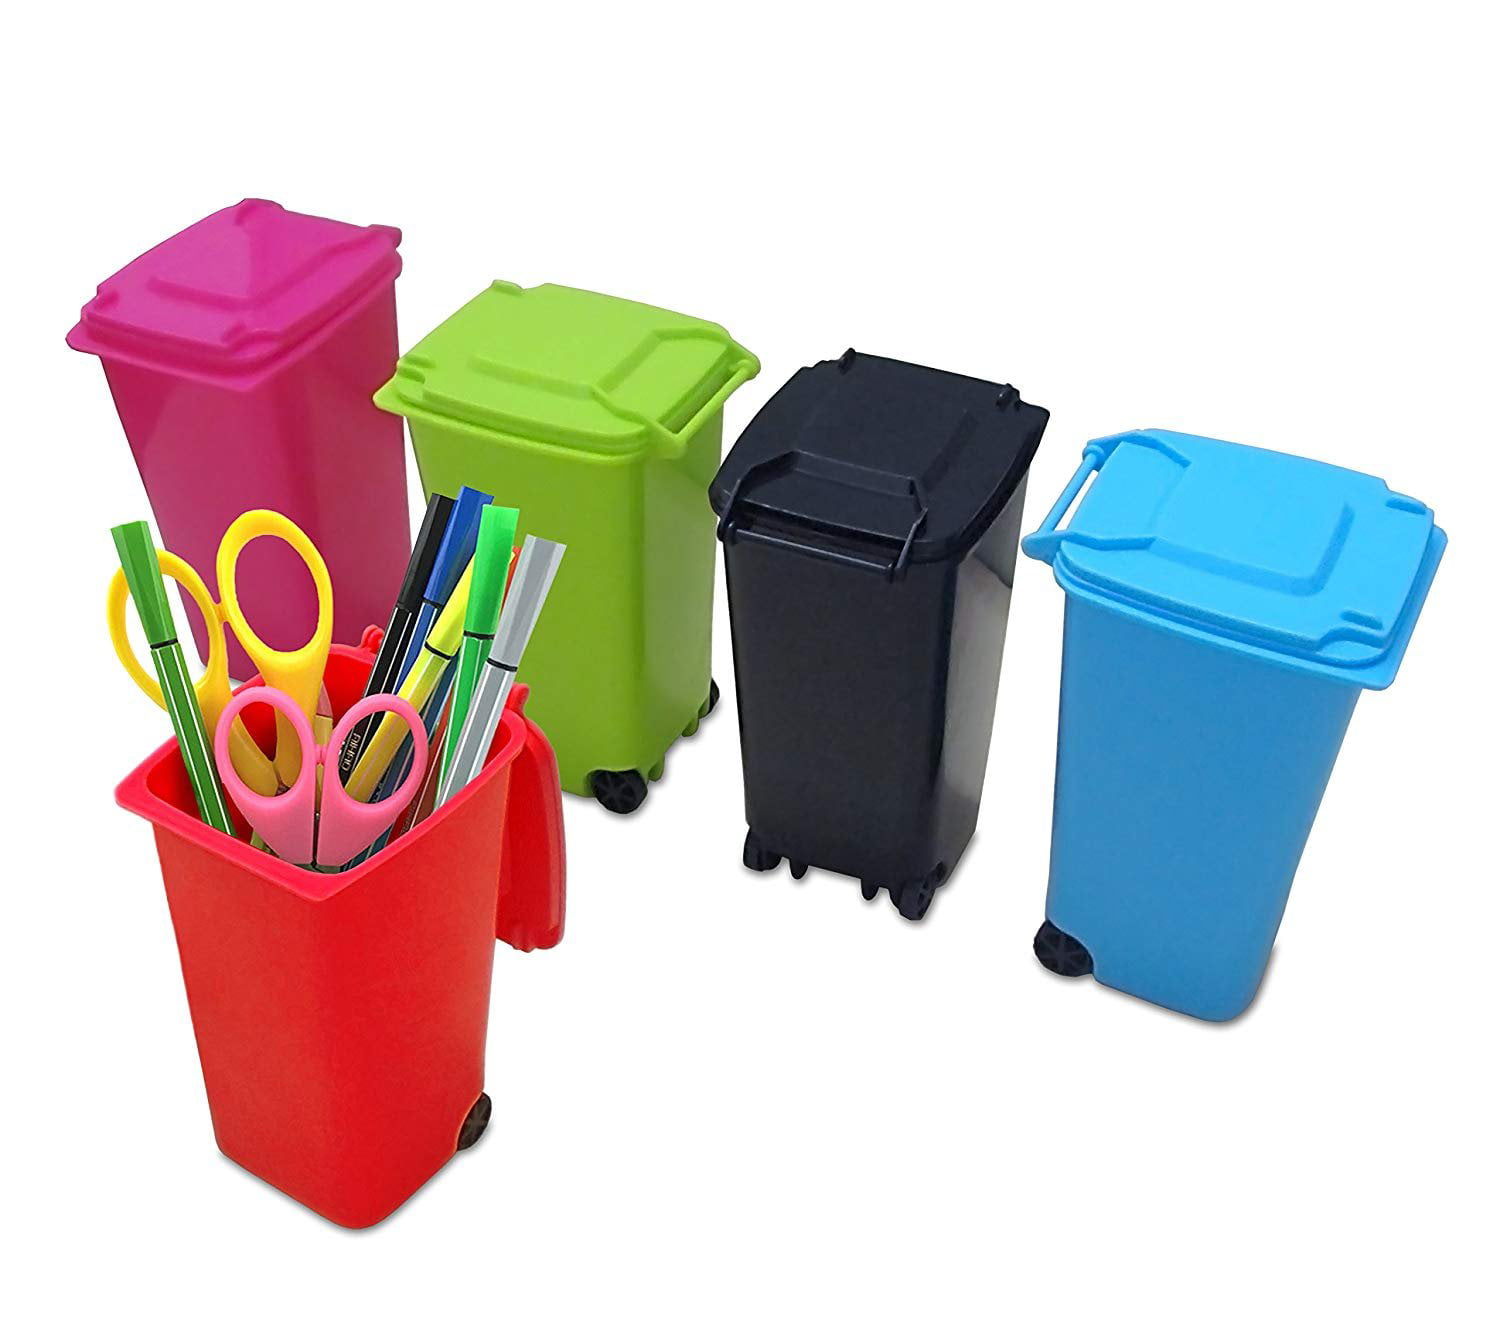 Details about   pencil holder set two Trash /Garbage/ Recycle Cans With Lid on Wheels red 